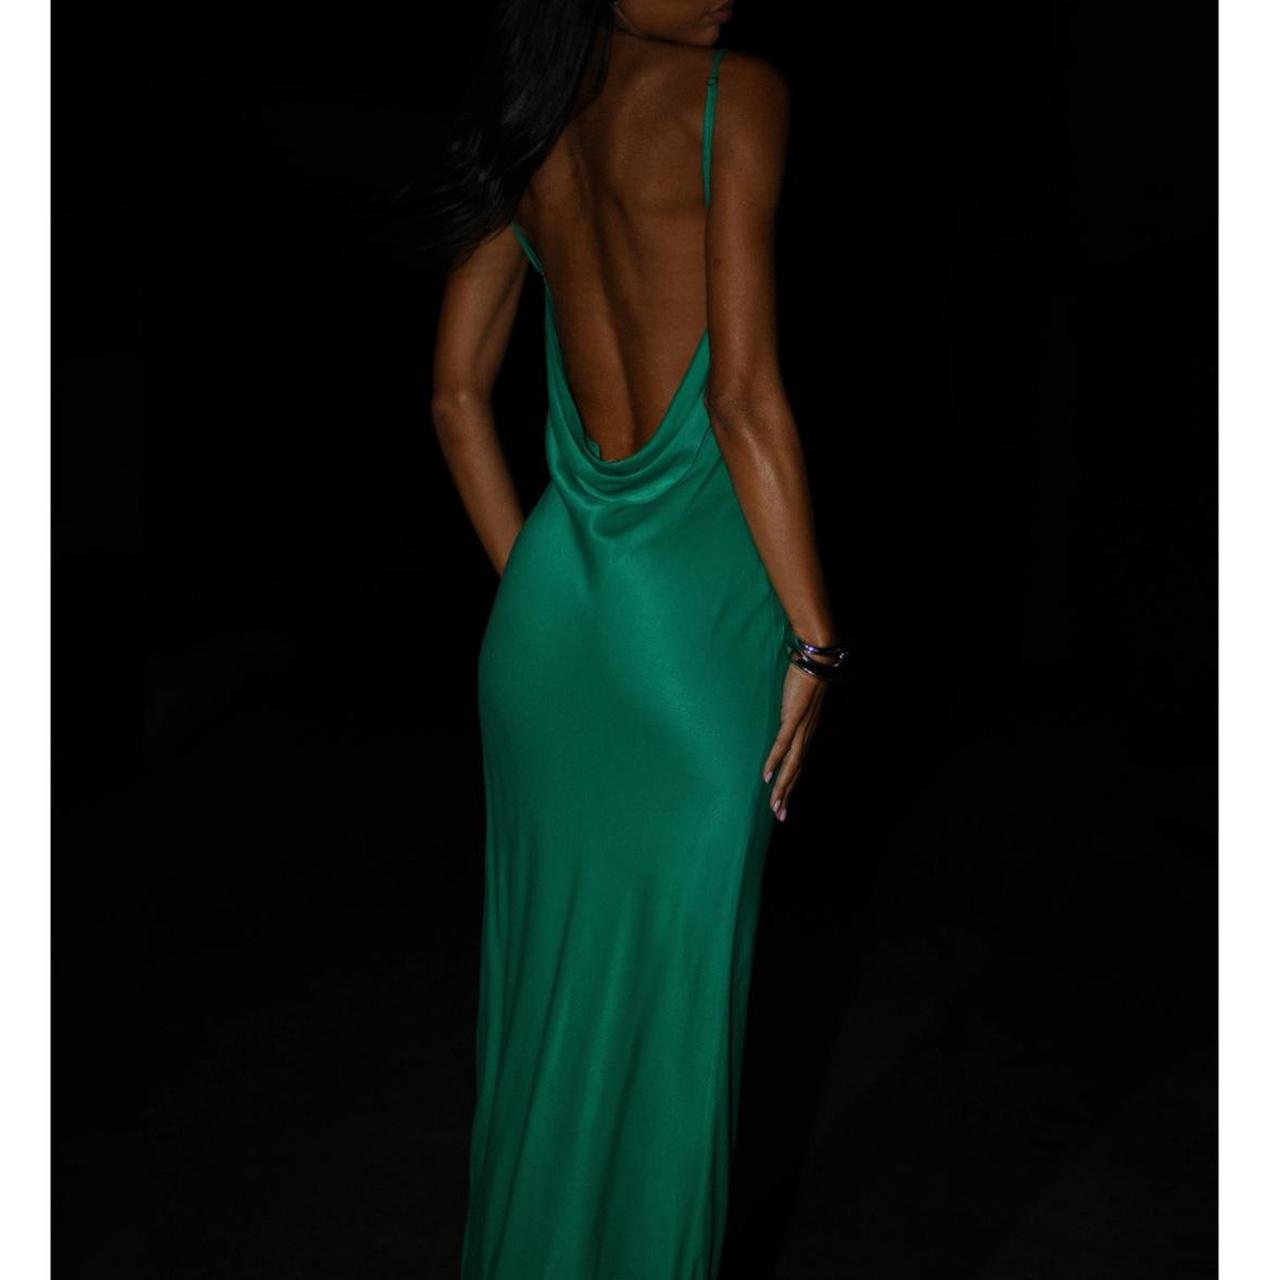 Cowl Neck Backless Maxi Dress in JADE Worn once! For... - Depop